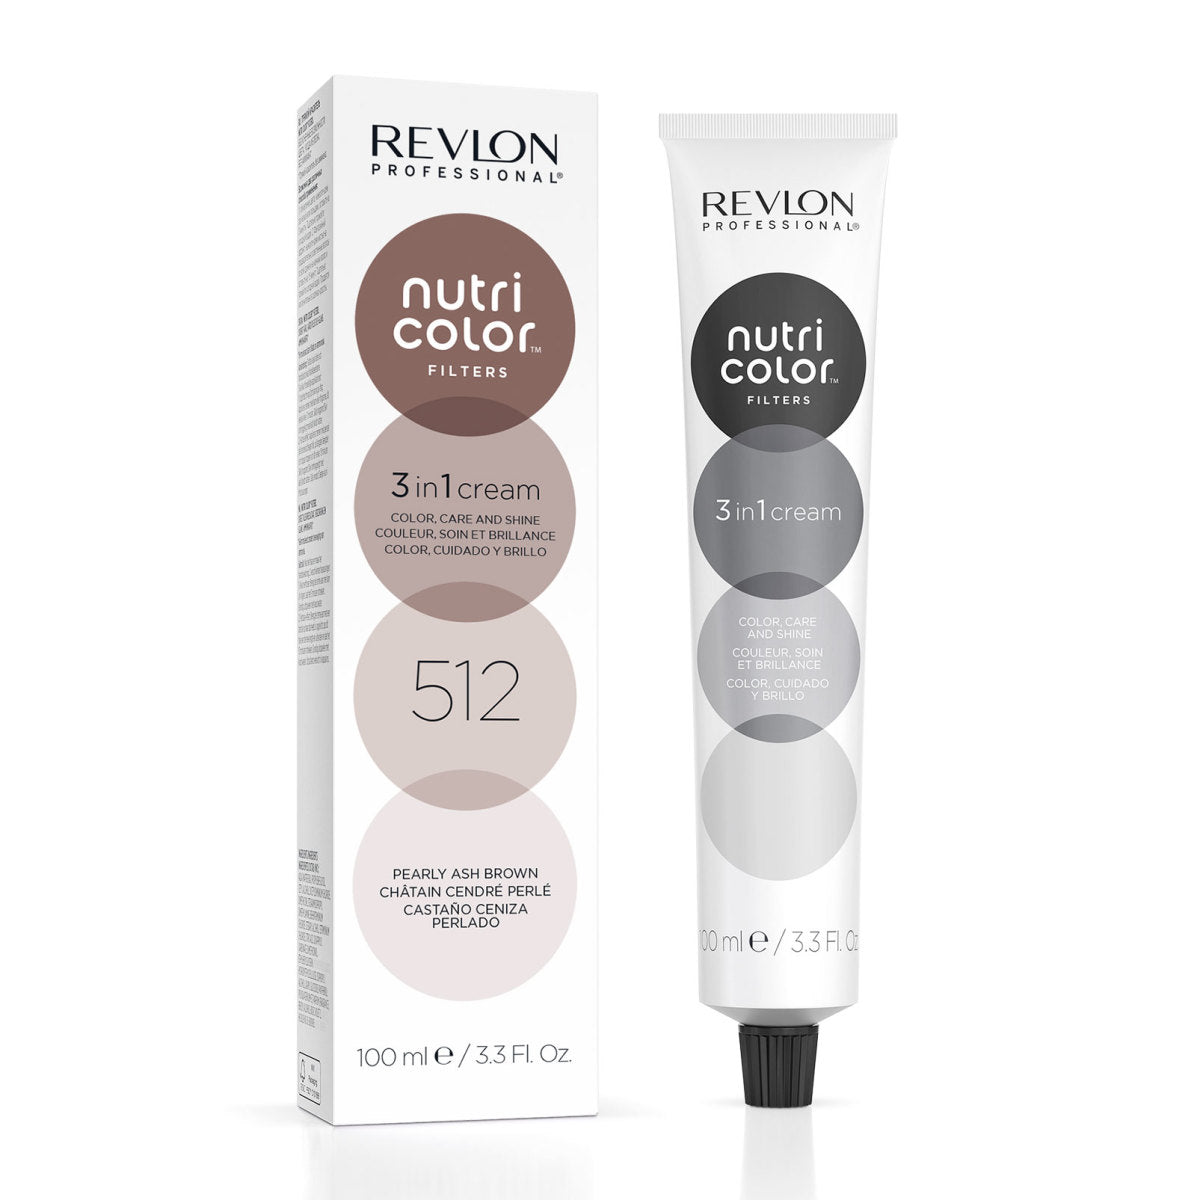 Revlon Pro Nutri Color Filters 512 - Pearly Ash Brown 100 ml